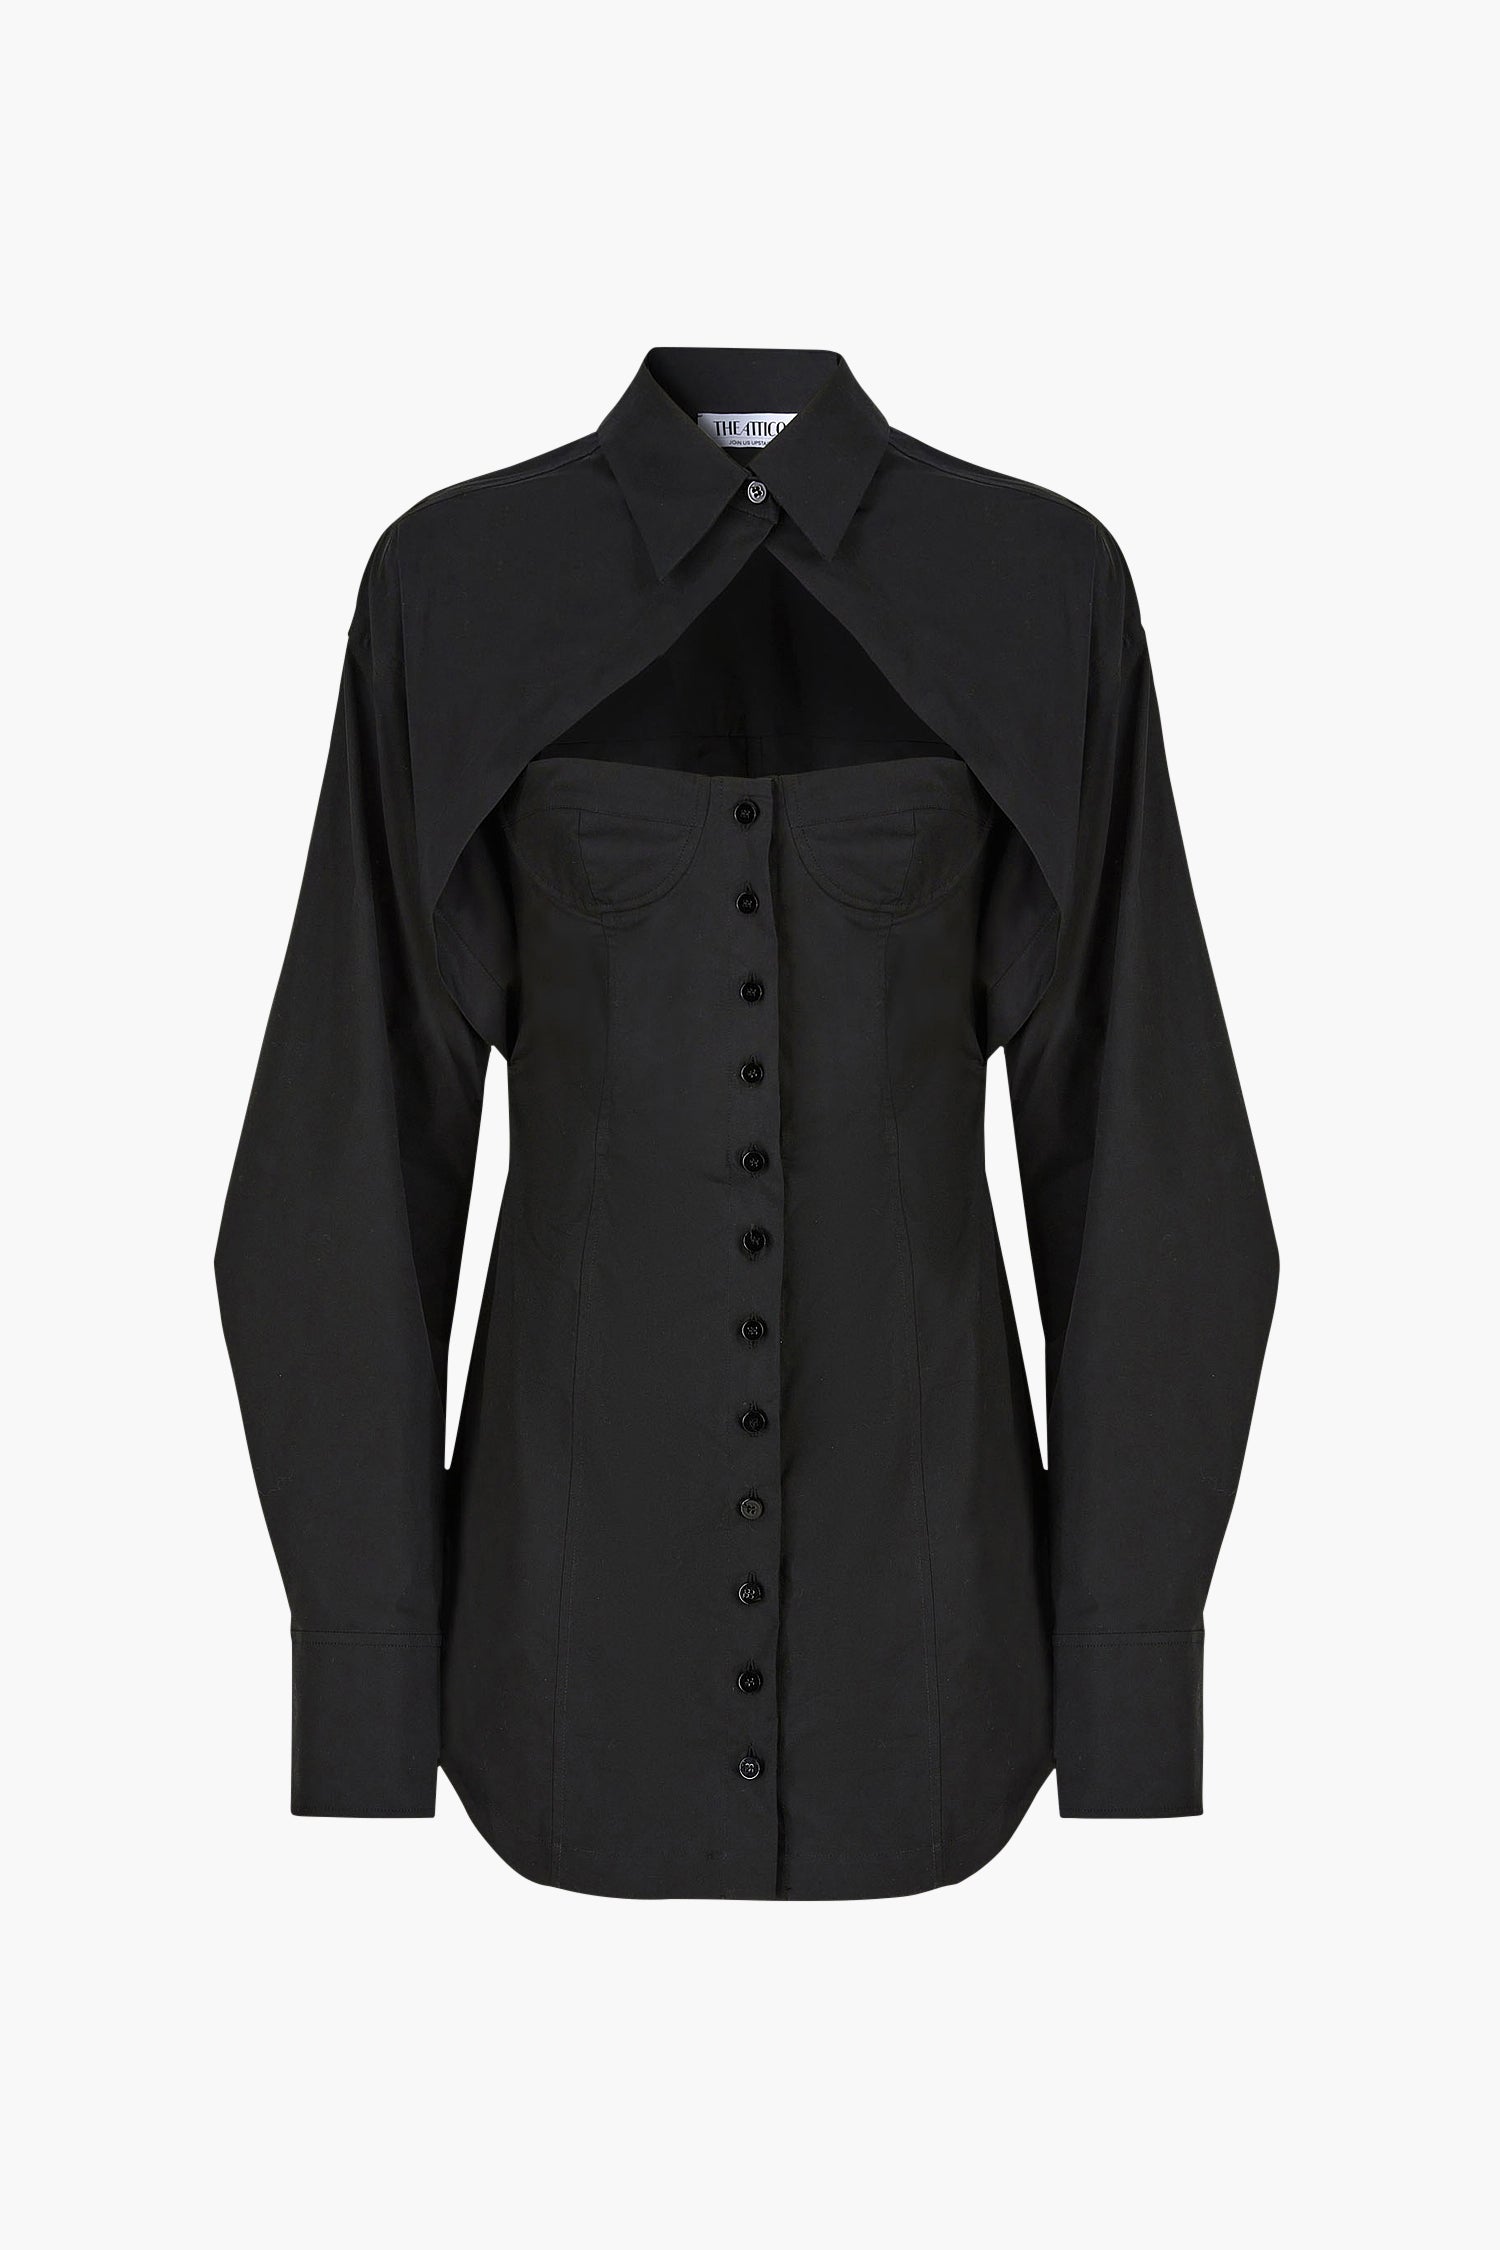 The Attico Mini Shirt Dress in Black available at TNT The New Trend